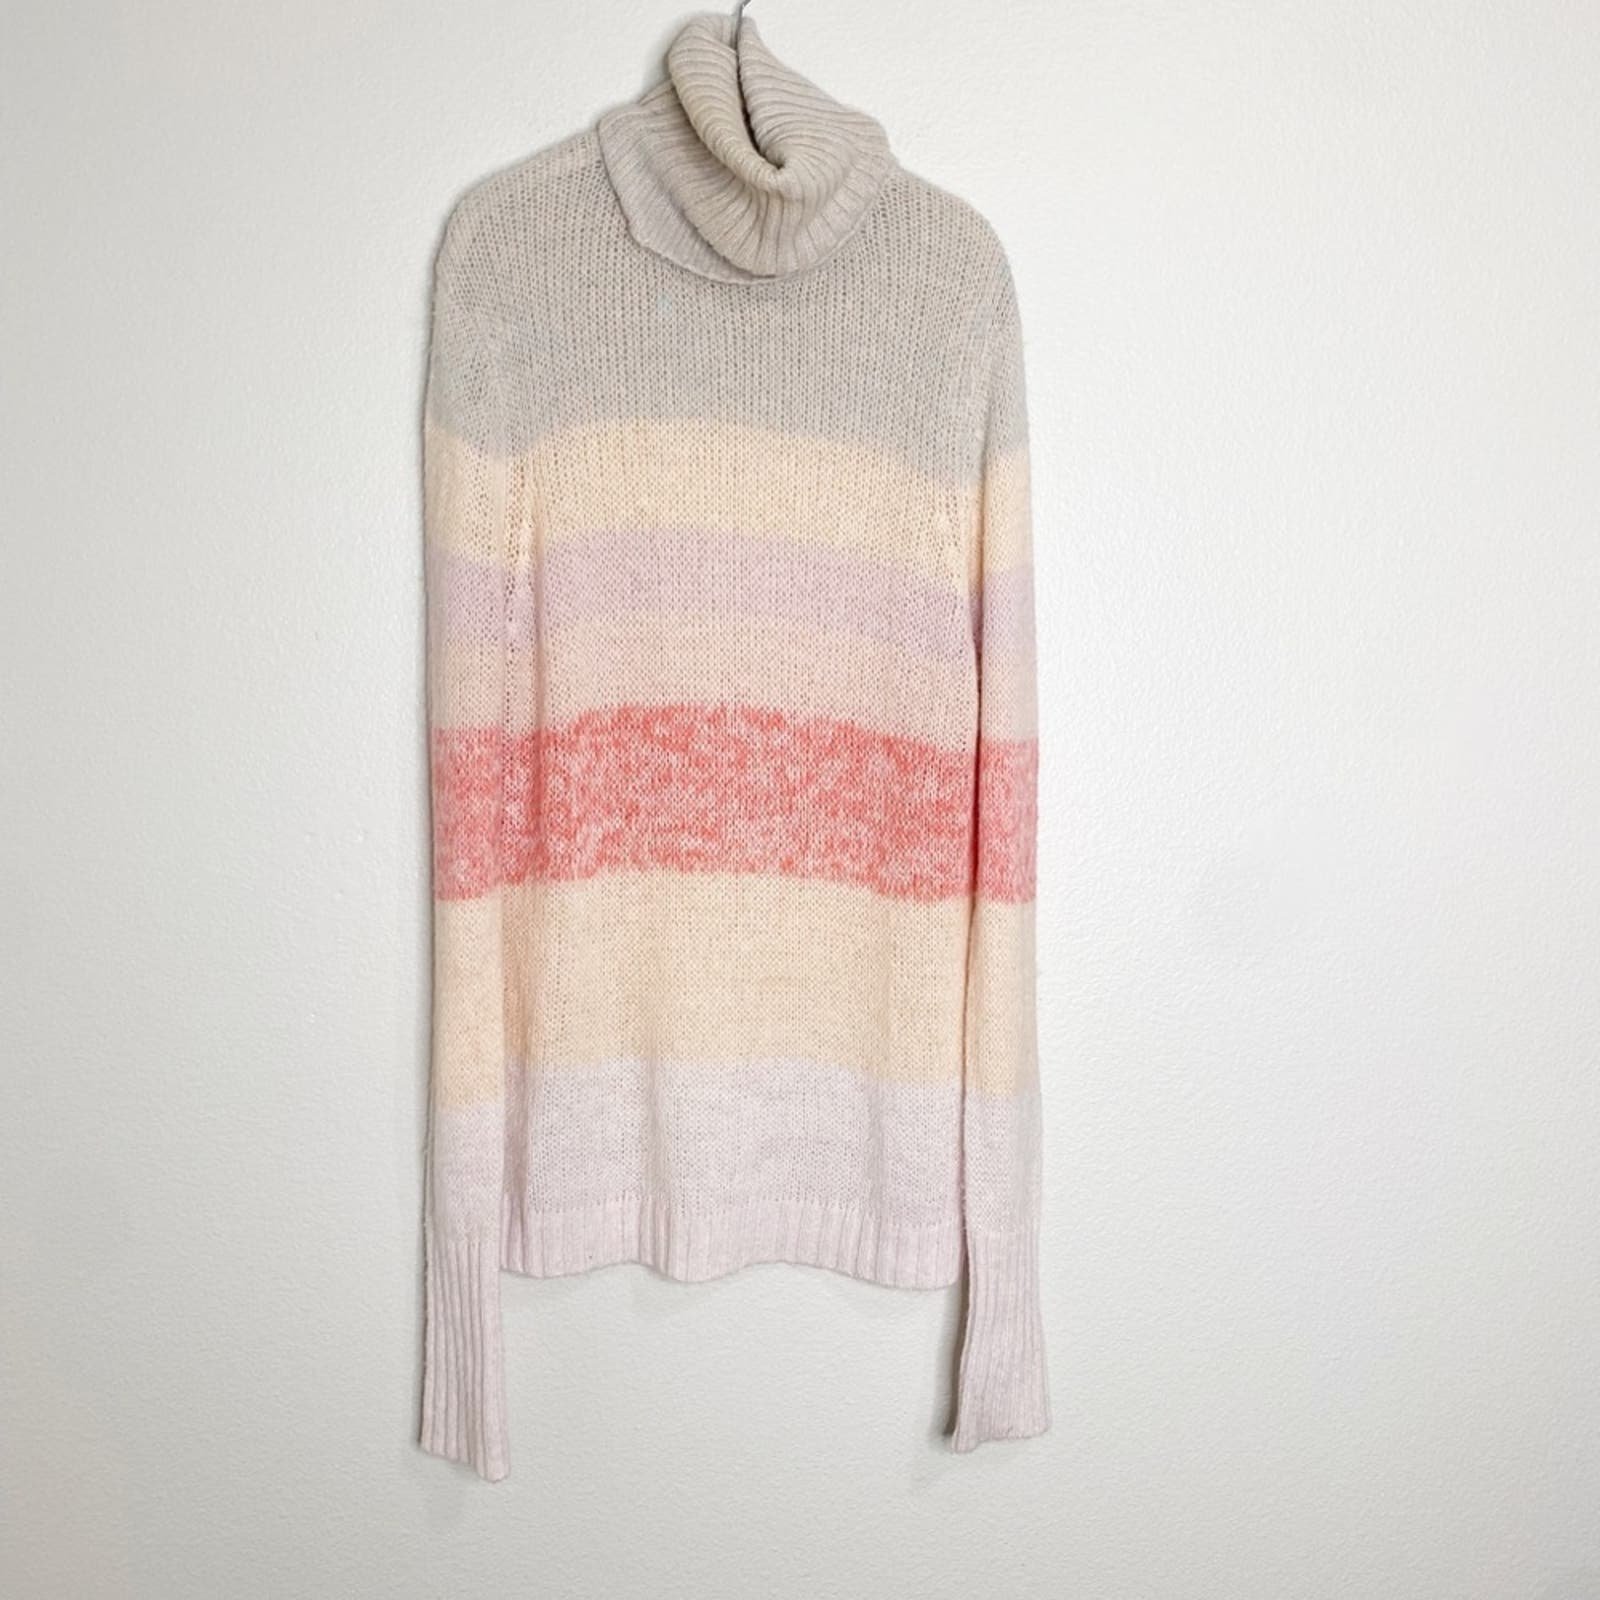 Factory Direct  wildfox white label knit turtleneck sweater size large n99w6K0rh US Outlet